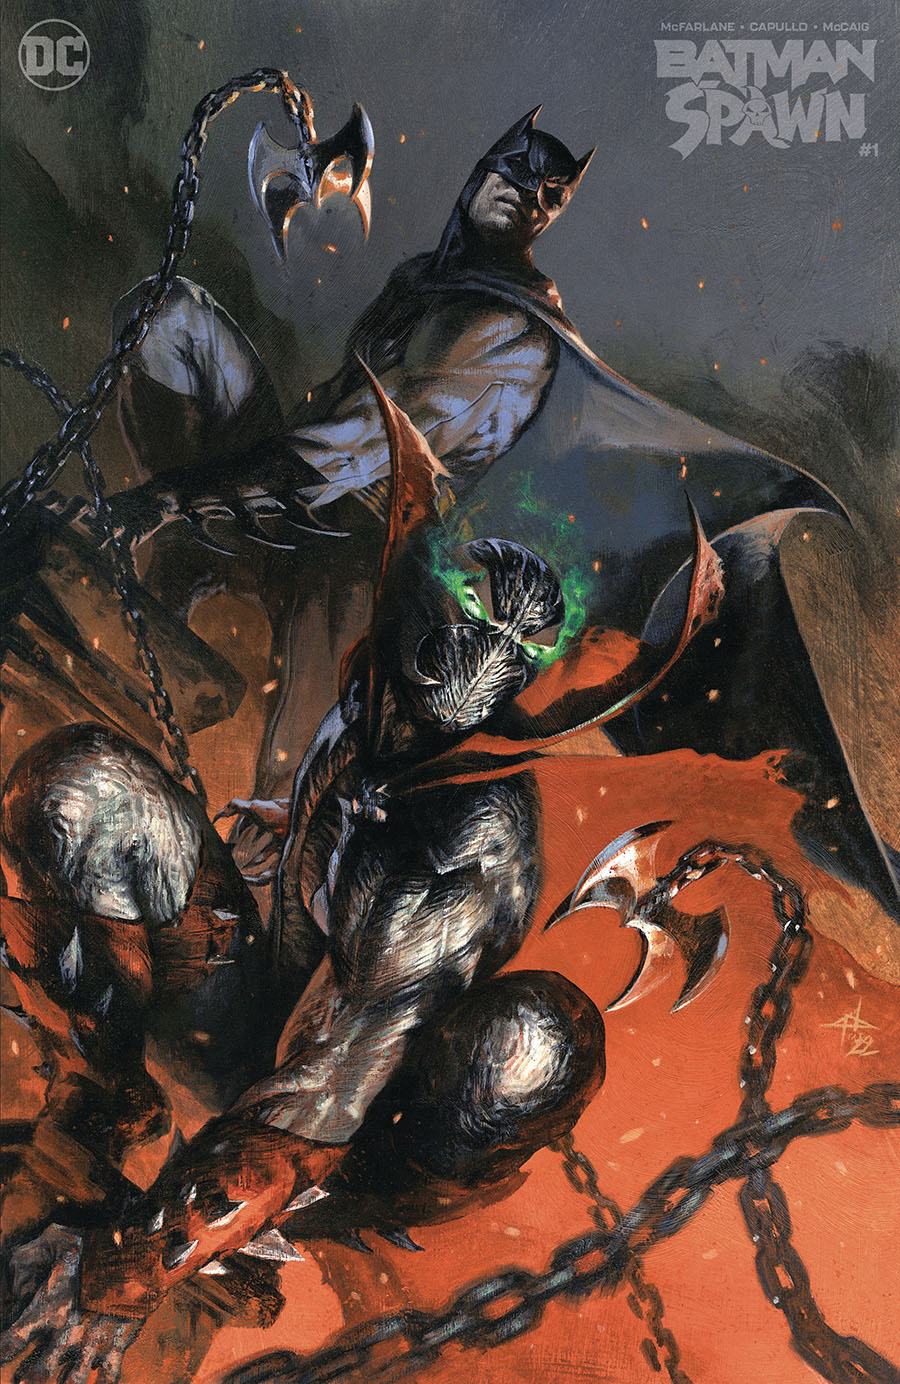 Batman Spawn #1 (One Shot) Cover Z-C DF Gabriele Dell Otto Variant Cover Silver Signature Series Signed By Greg Capullo